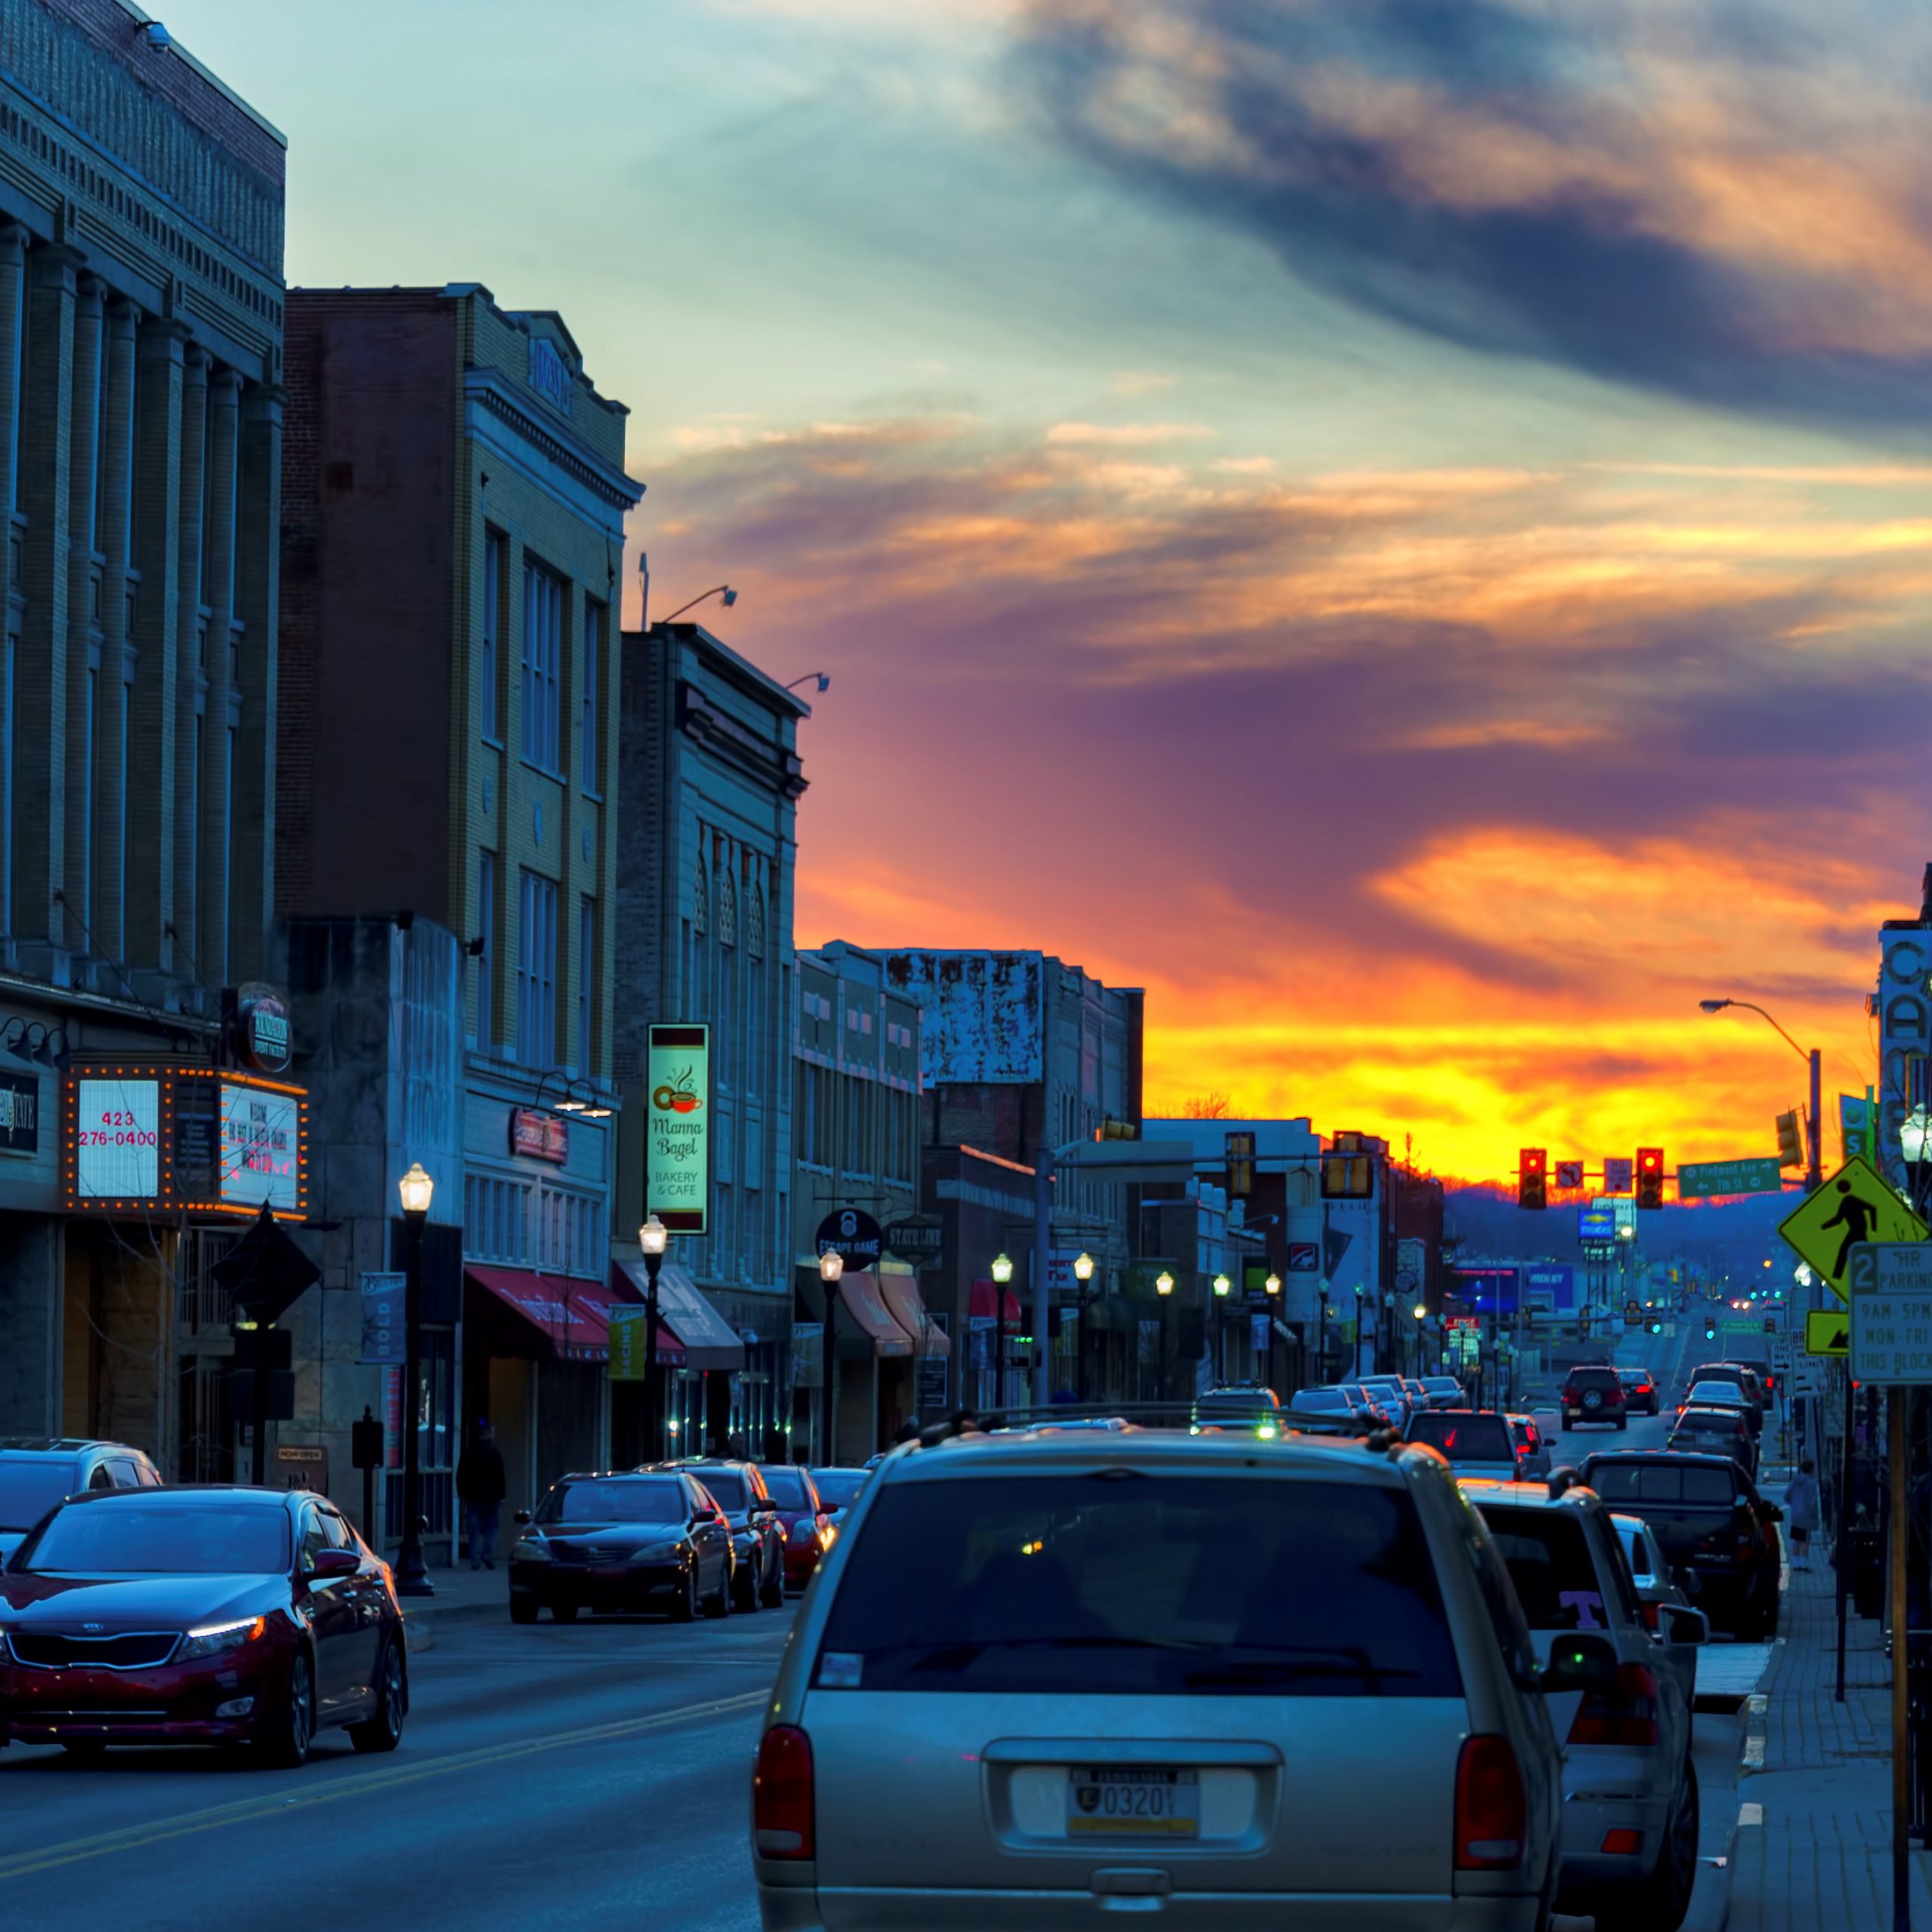 State Street In Bristol at dusk with colorful sunset skies.